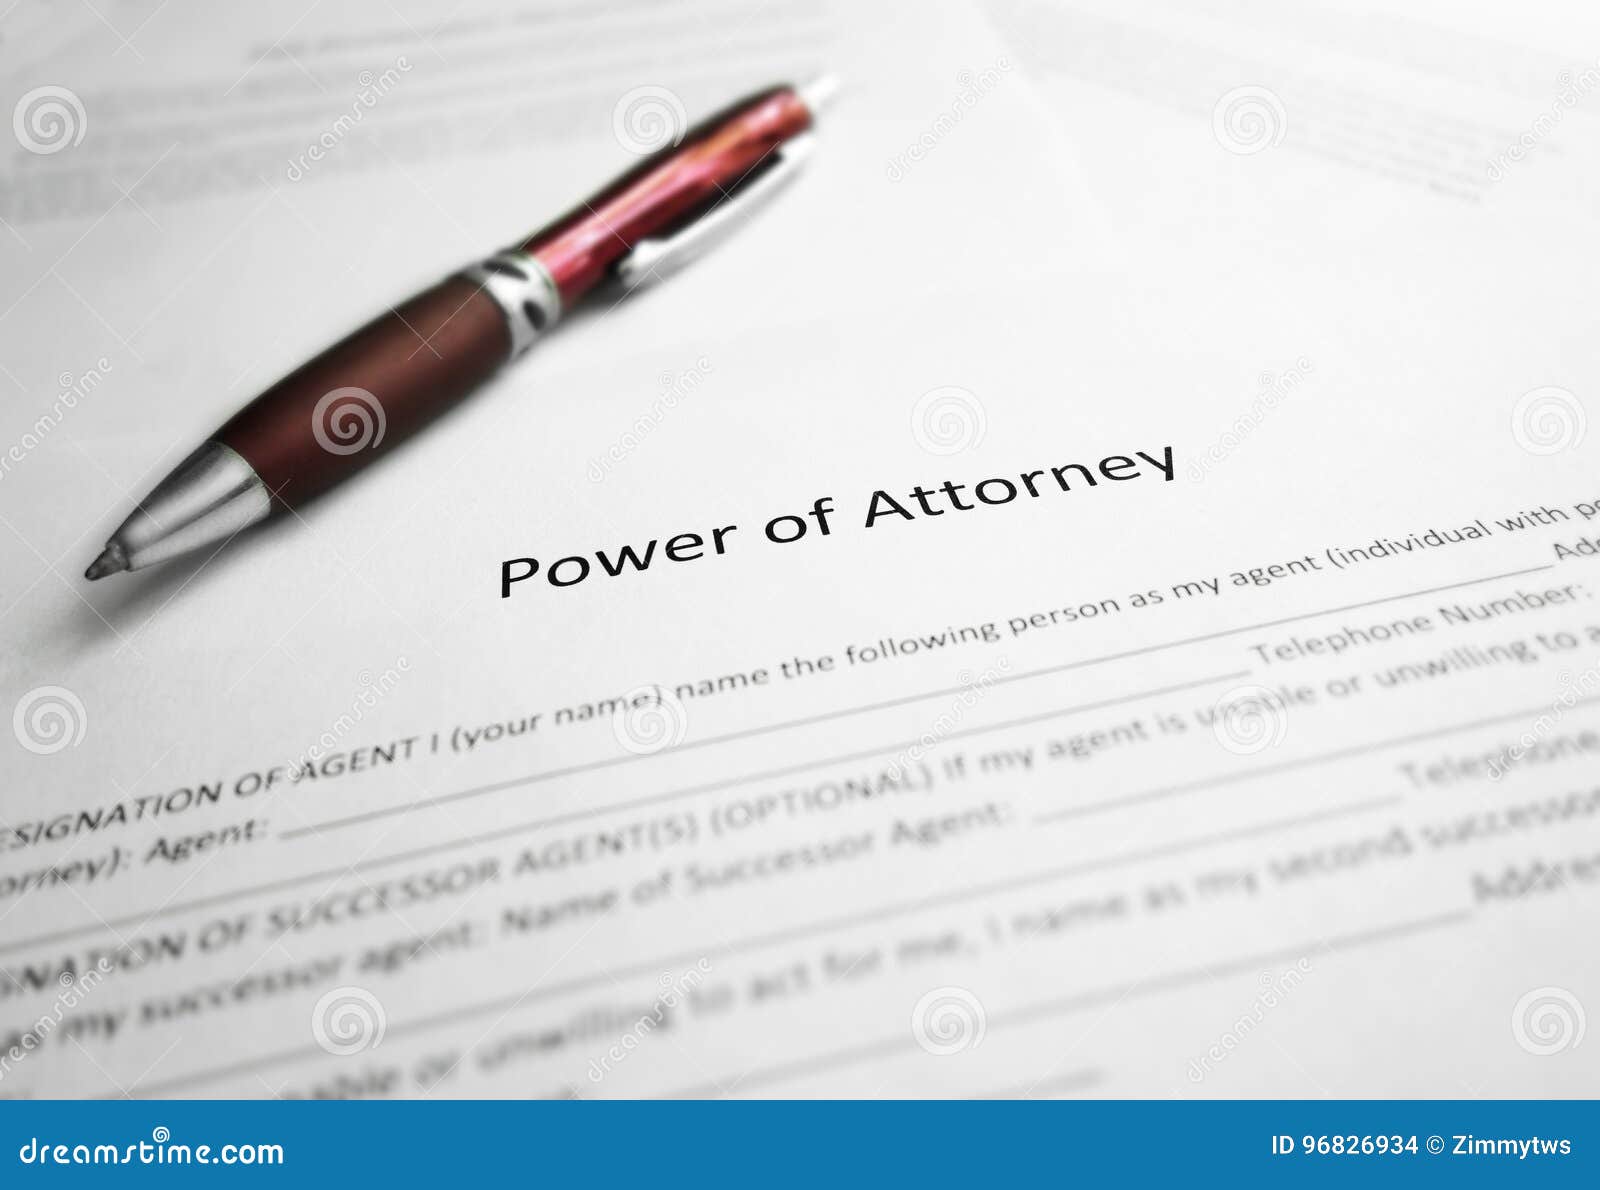 power of attorney paper